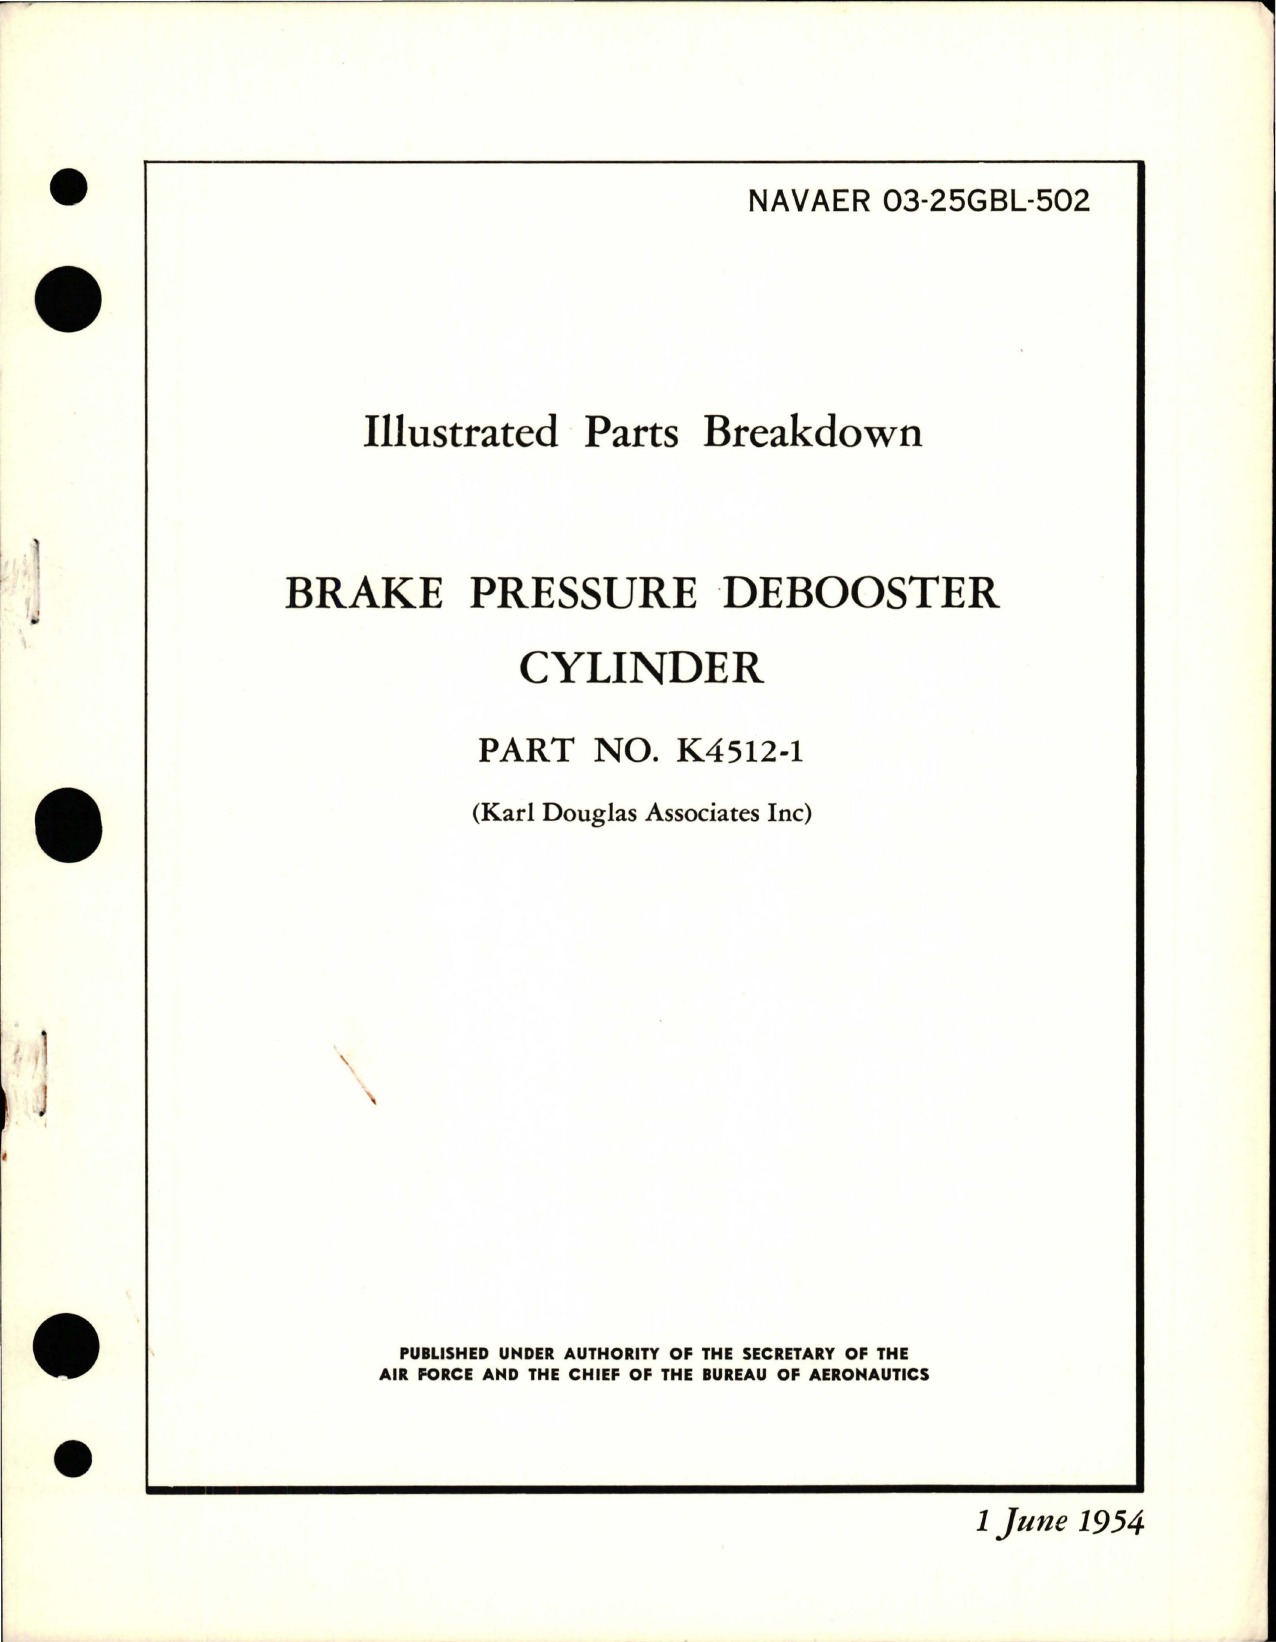 Sample page 1 from AirCorps Library document: Illustrated Parts Breakdown for Brake Pressure Debooster Cylinder - Part K4512-1